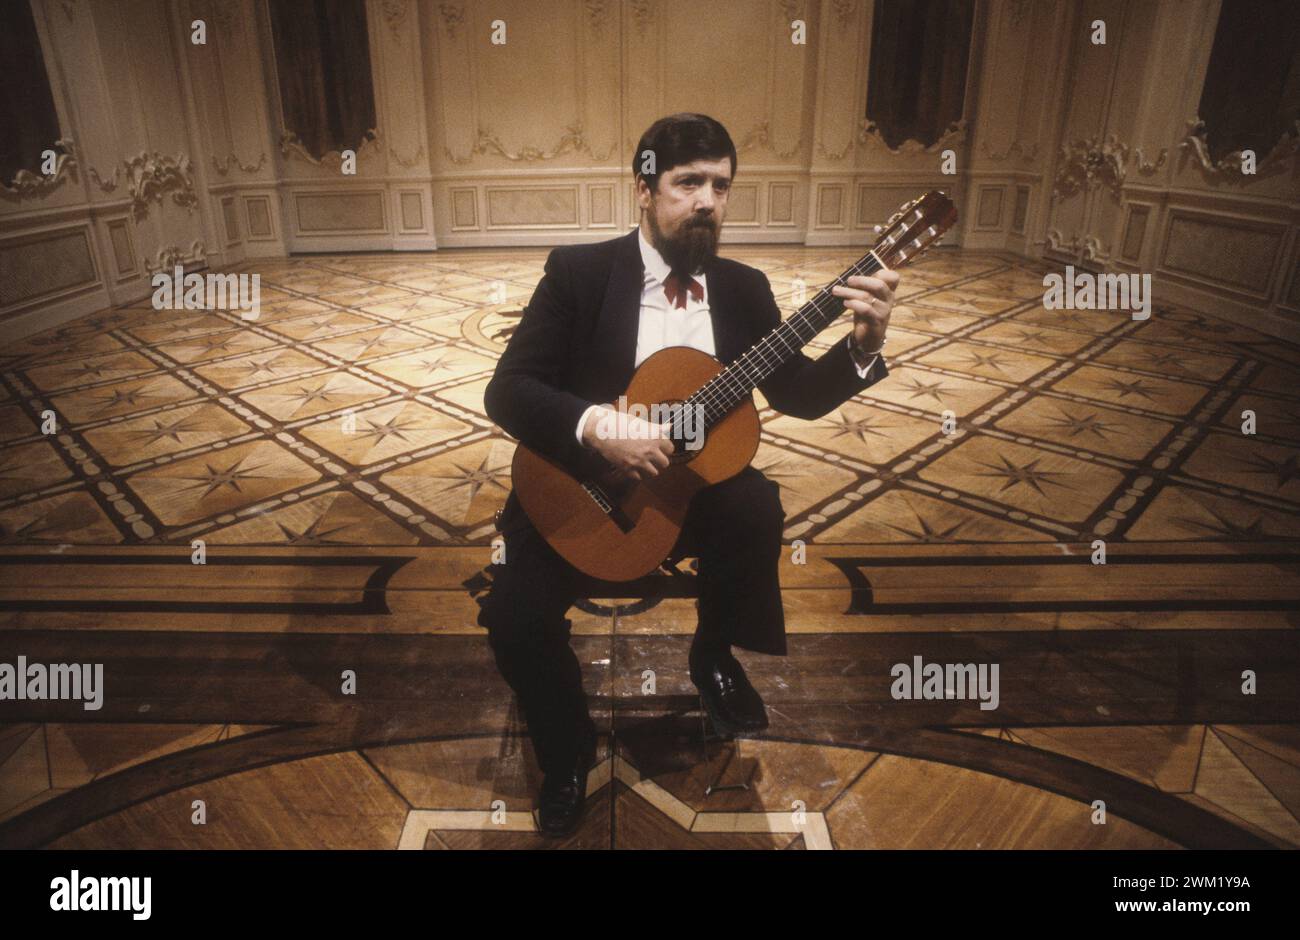 MME4746865 Italian classical guitarist Oscar Ghiglia (1981)/Il chitarrista classico oscar Ghiglia (1981) -; (add.info.: Italian classical guitarist Oscar Ghiglia (1981)/Il chitarrista classico oscar Ghiglia (1981) -); © Marcello Mencarini. All rights reserved 2024. Stock Photo